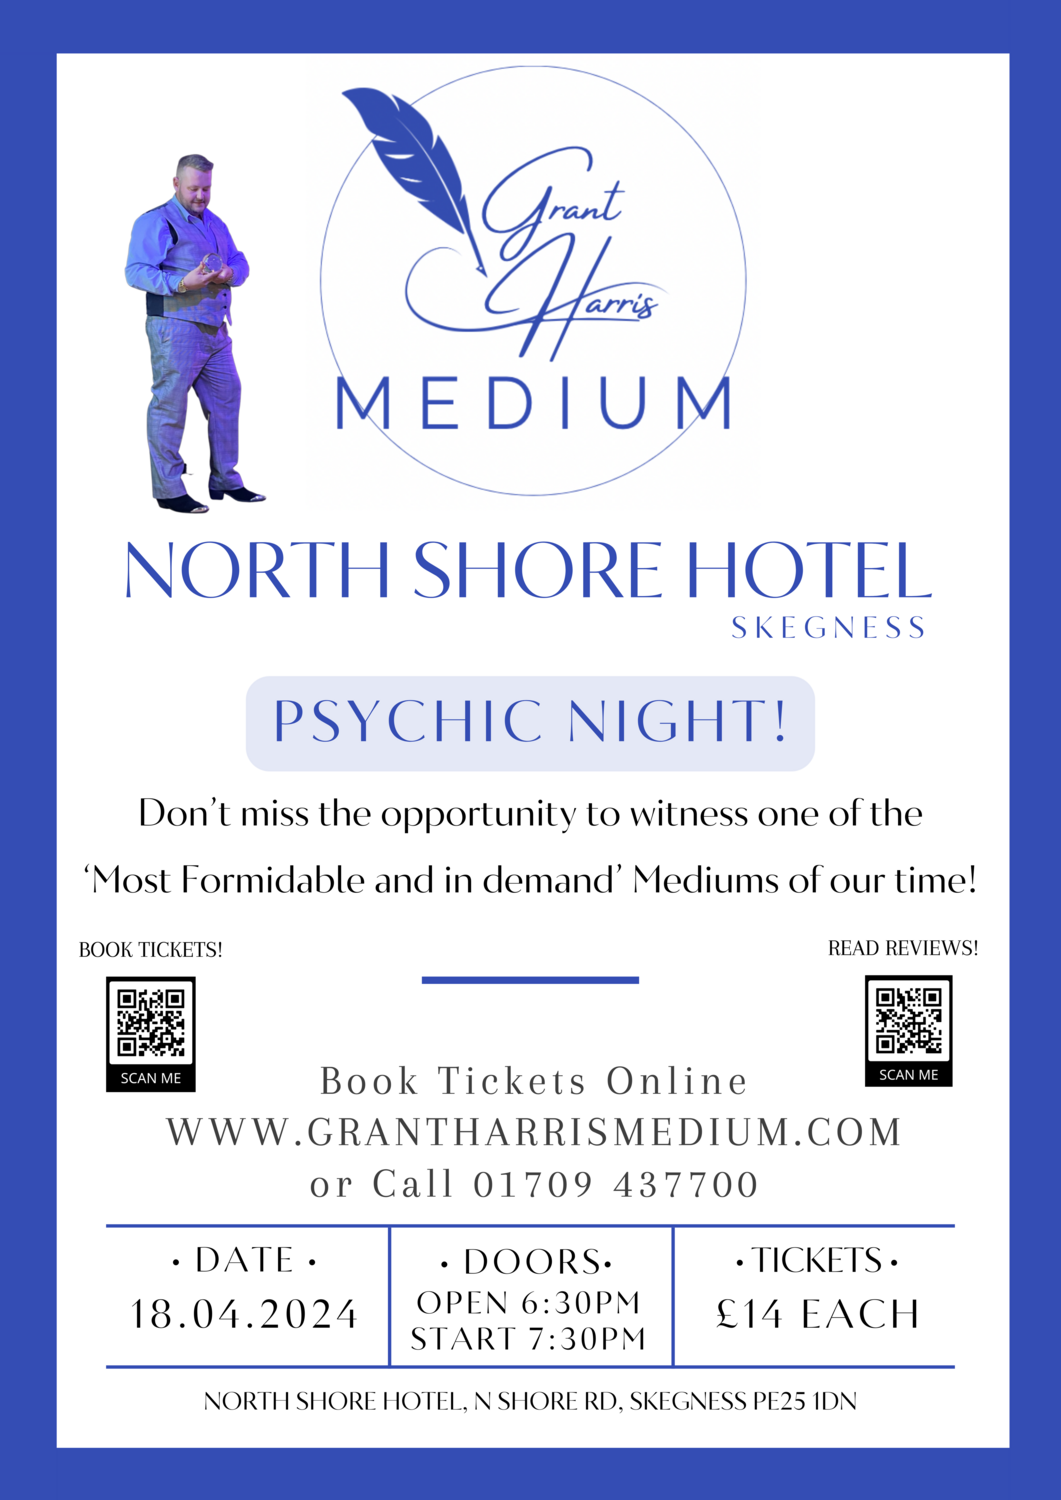 Psychic Night | North Shore Hotel, Skegness, Thu 18th April 2024